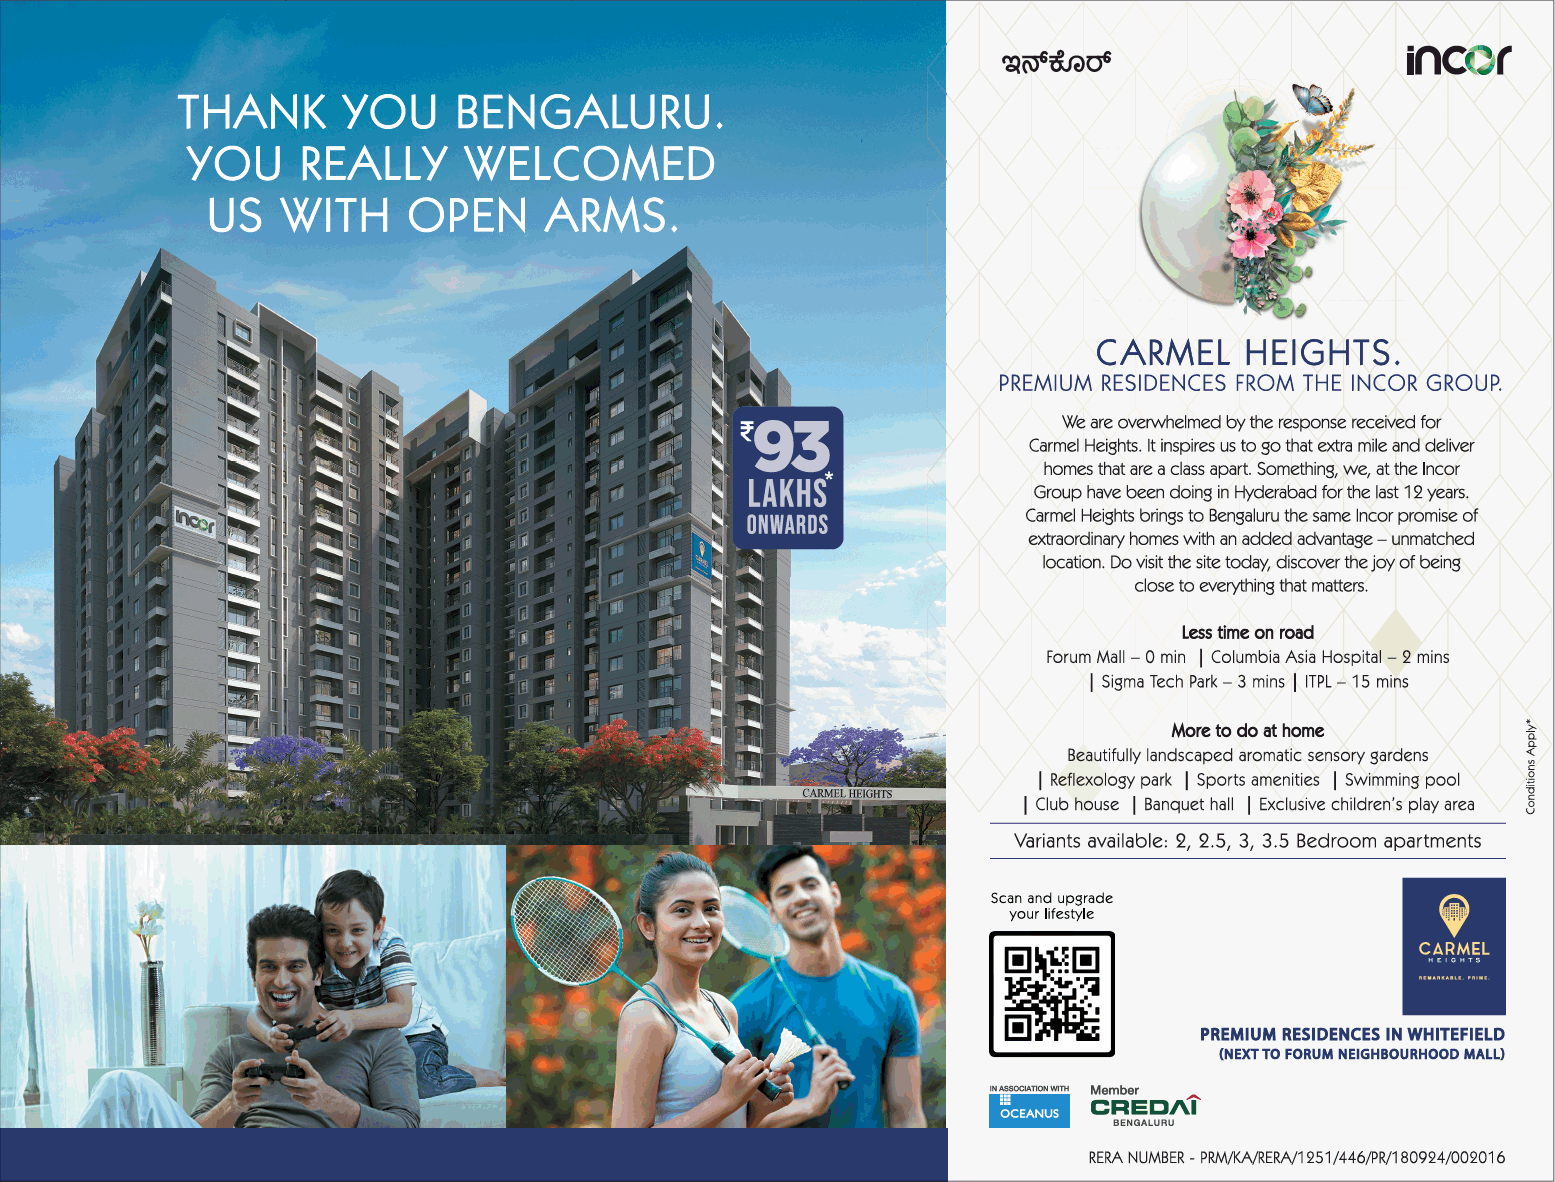 Incor Carmel Heights luxury amenities in Whitefield, Bangalore